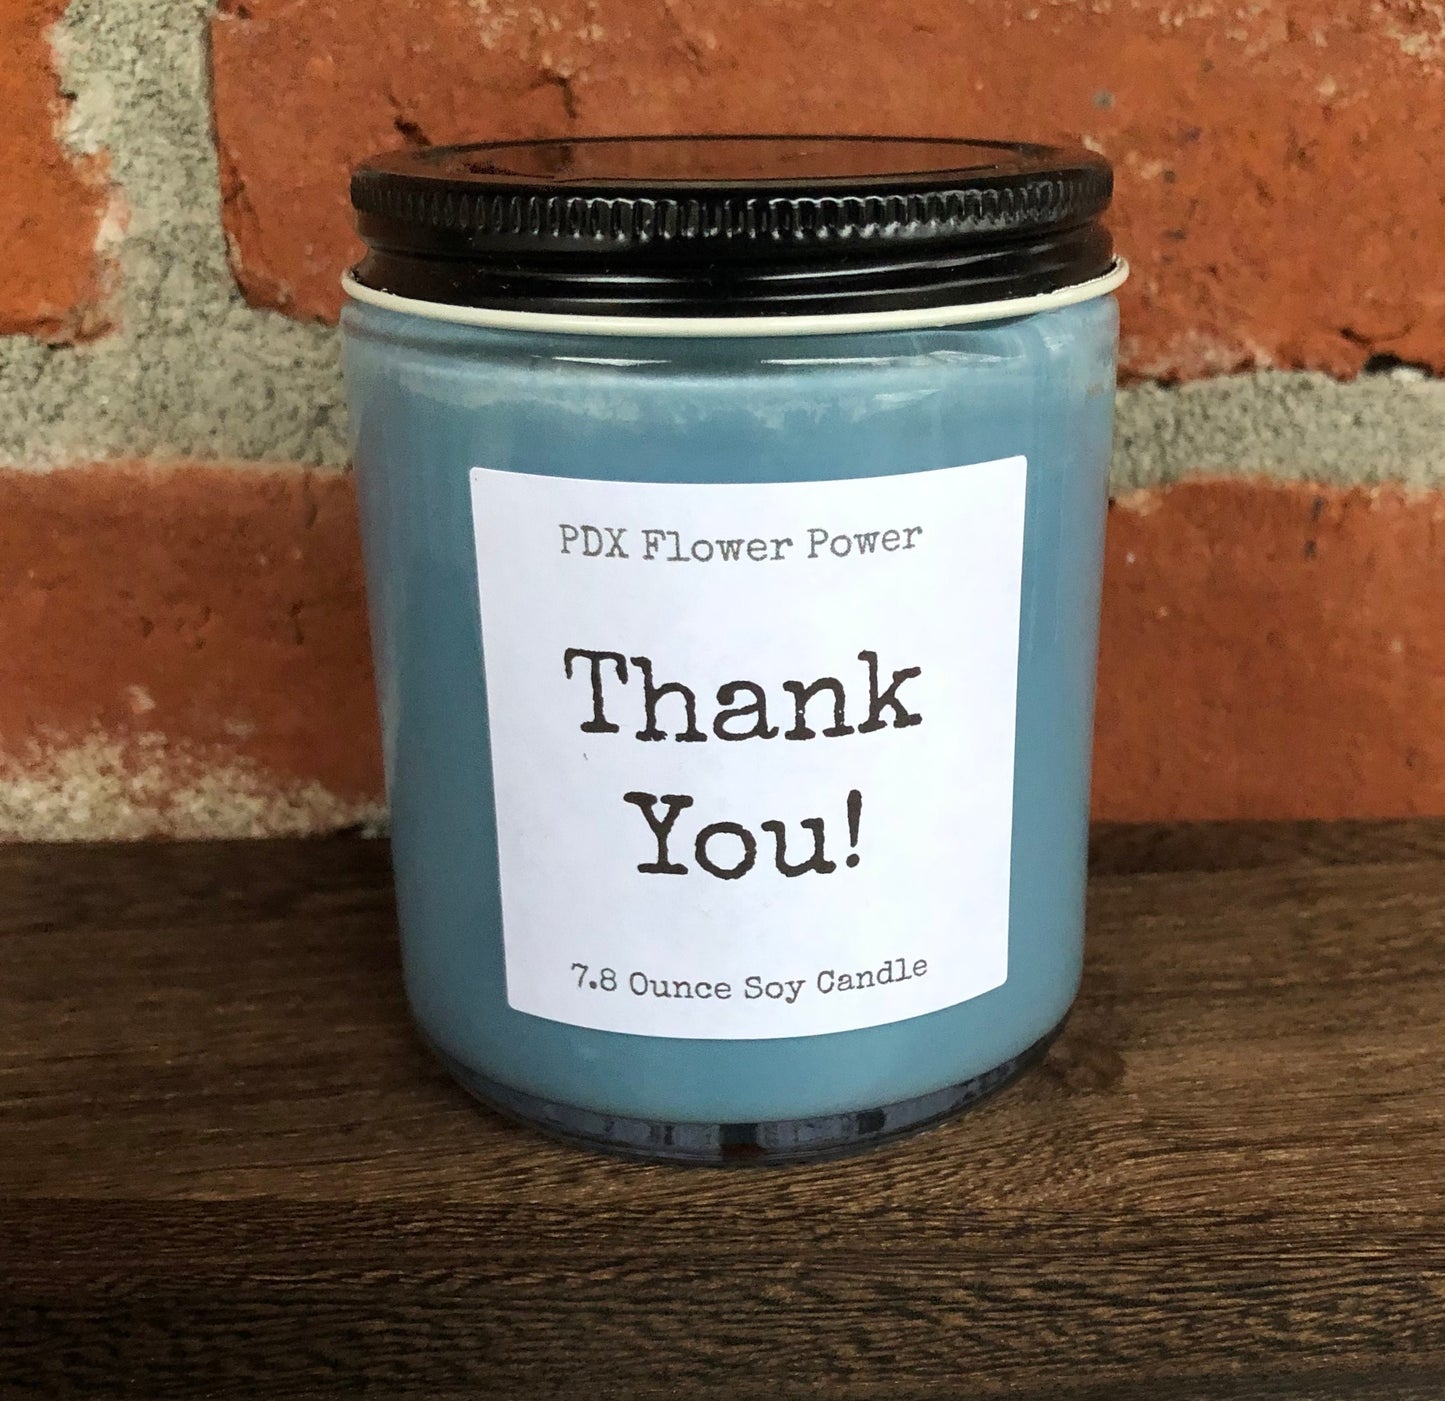 PDX Flower Power "Hug in a Jar" handcrafted soy candle